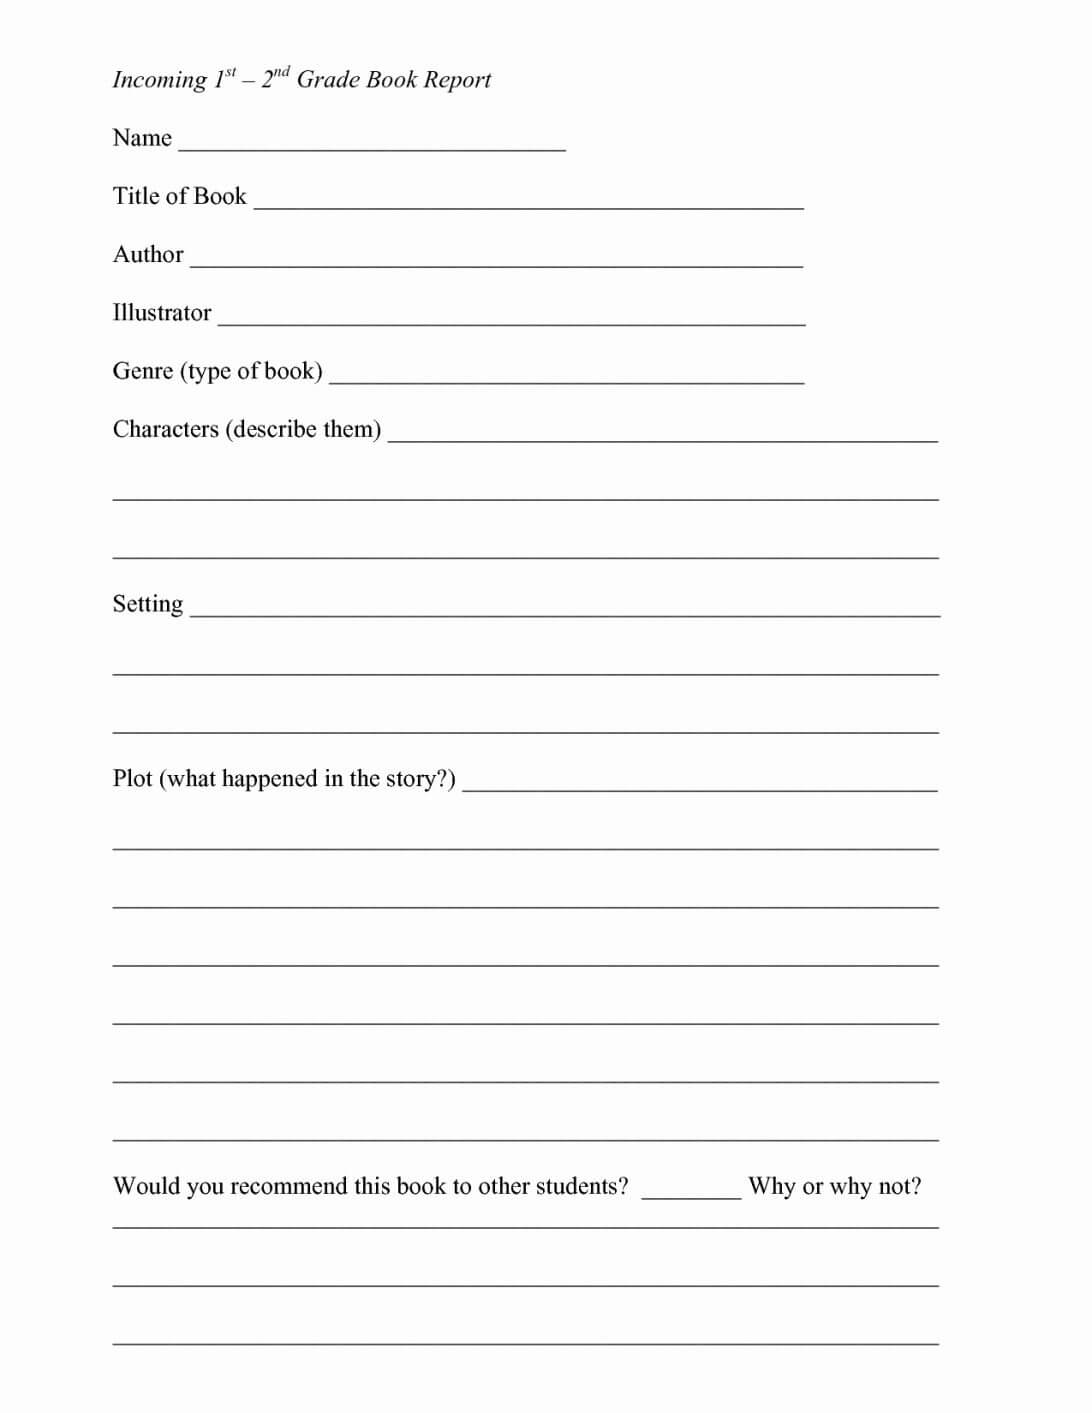 Book Report Template 2Nd Grade Df Free Examples Pdf Easy Throughout Book Report Template 2Nd Grade